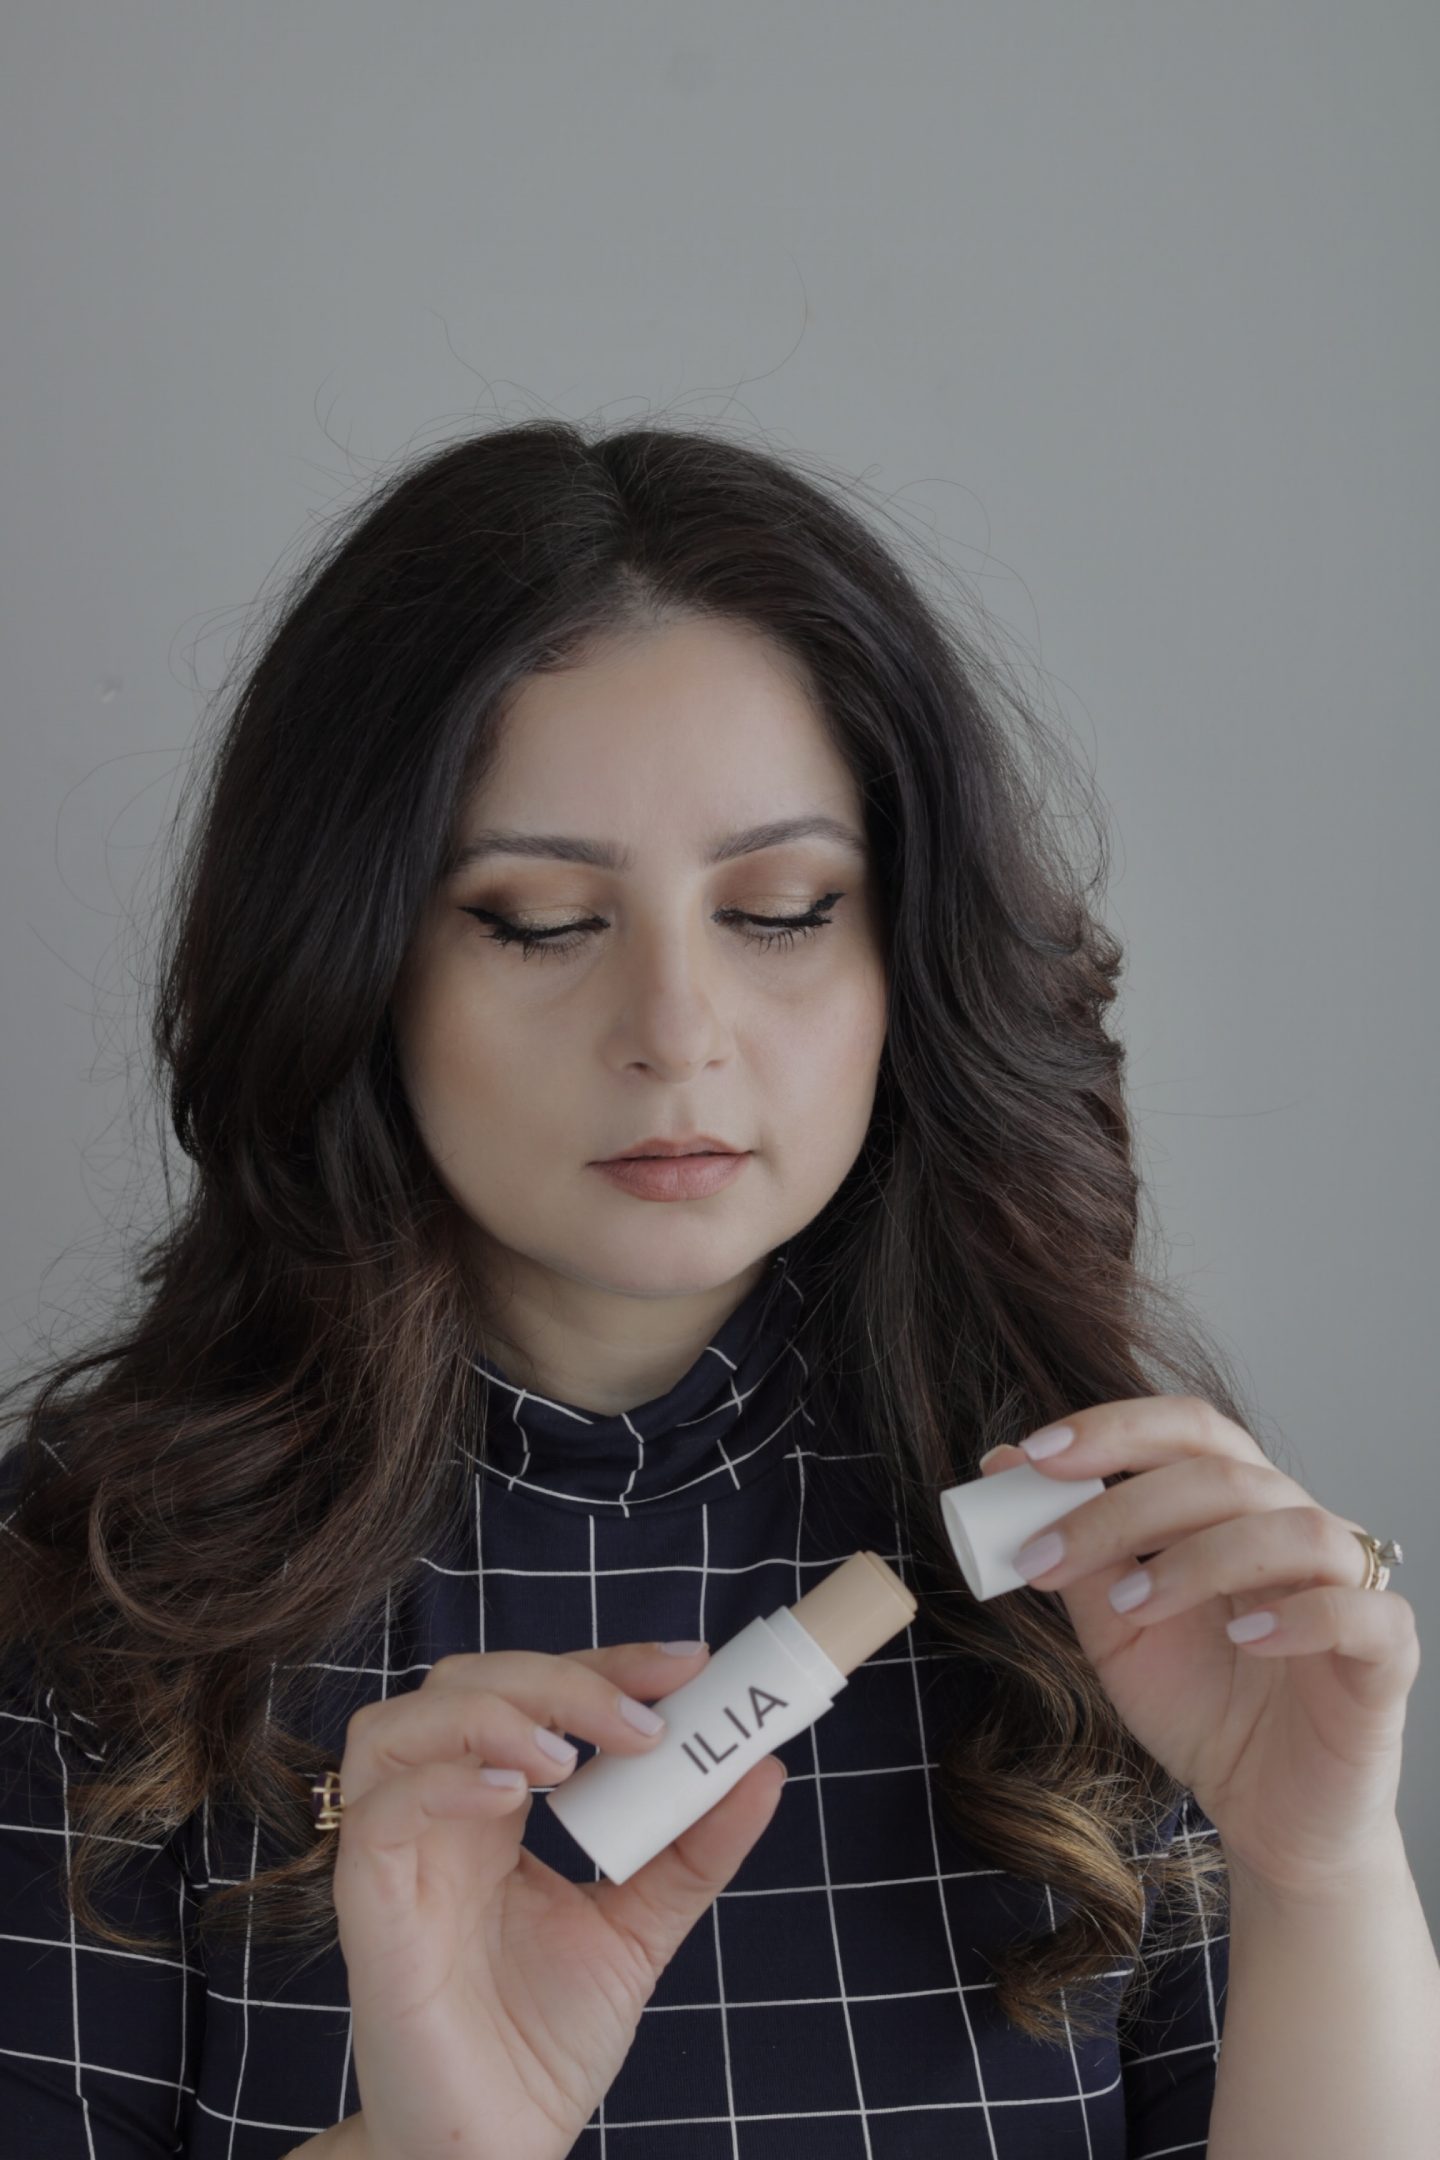 Ilia Beauty Skin Rewind Blurring Foundation and Concealer Complexion Stick Review